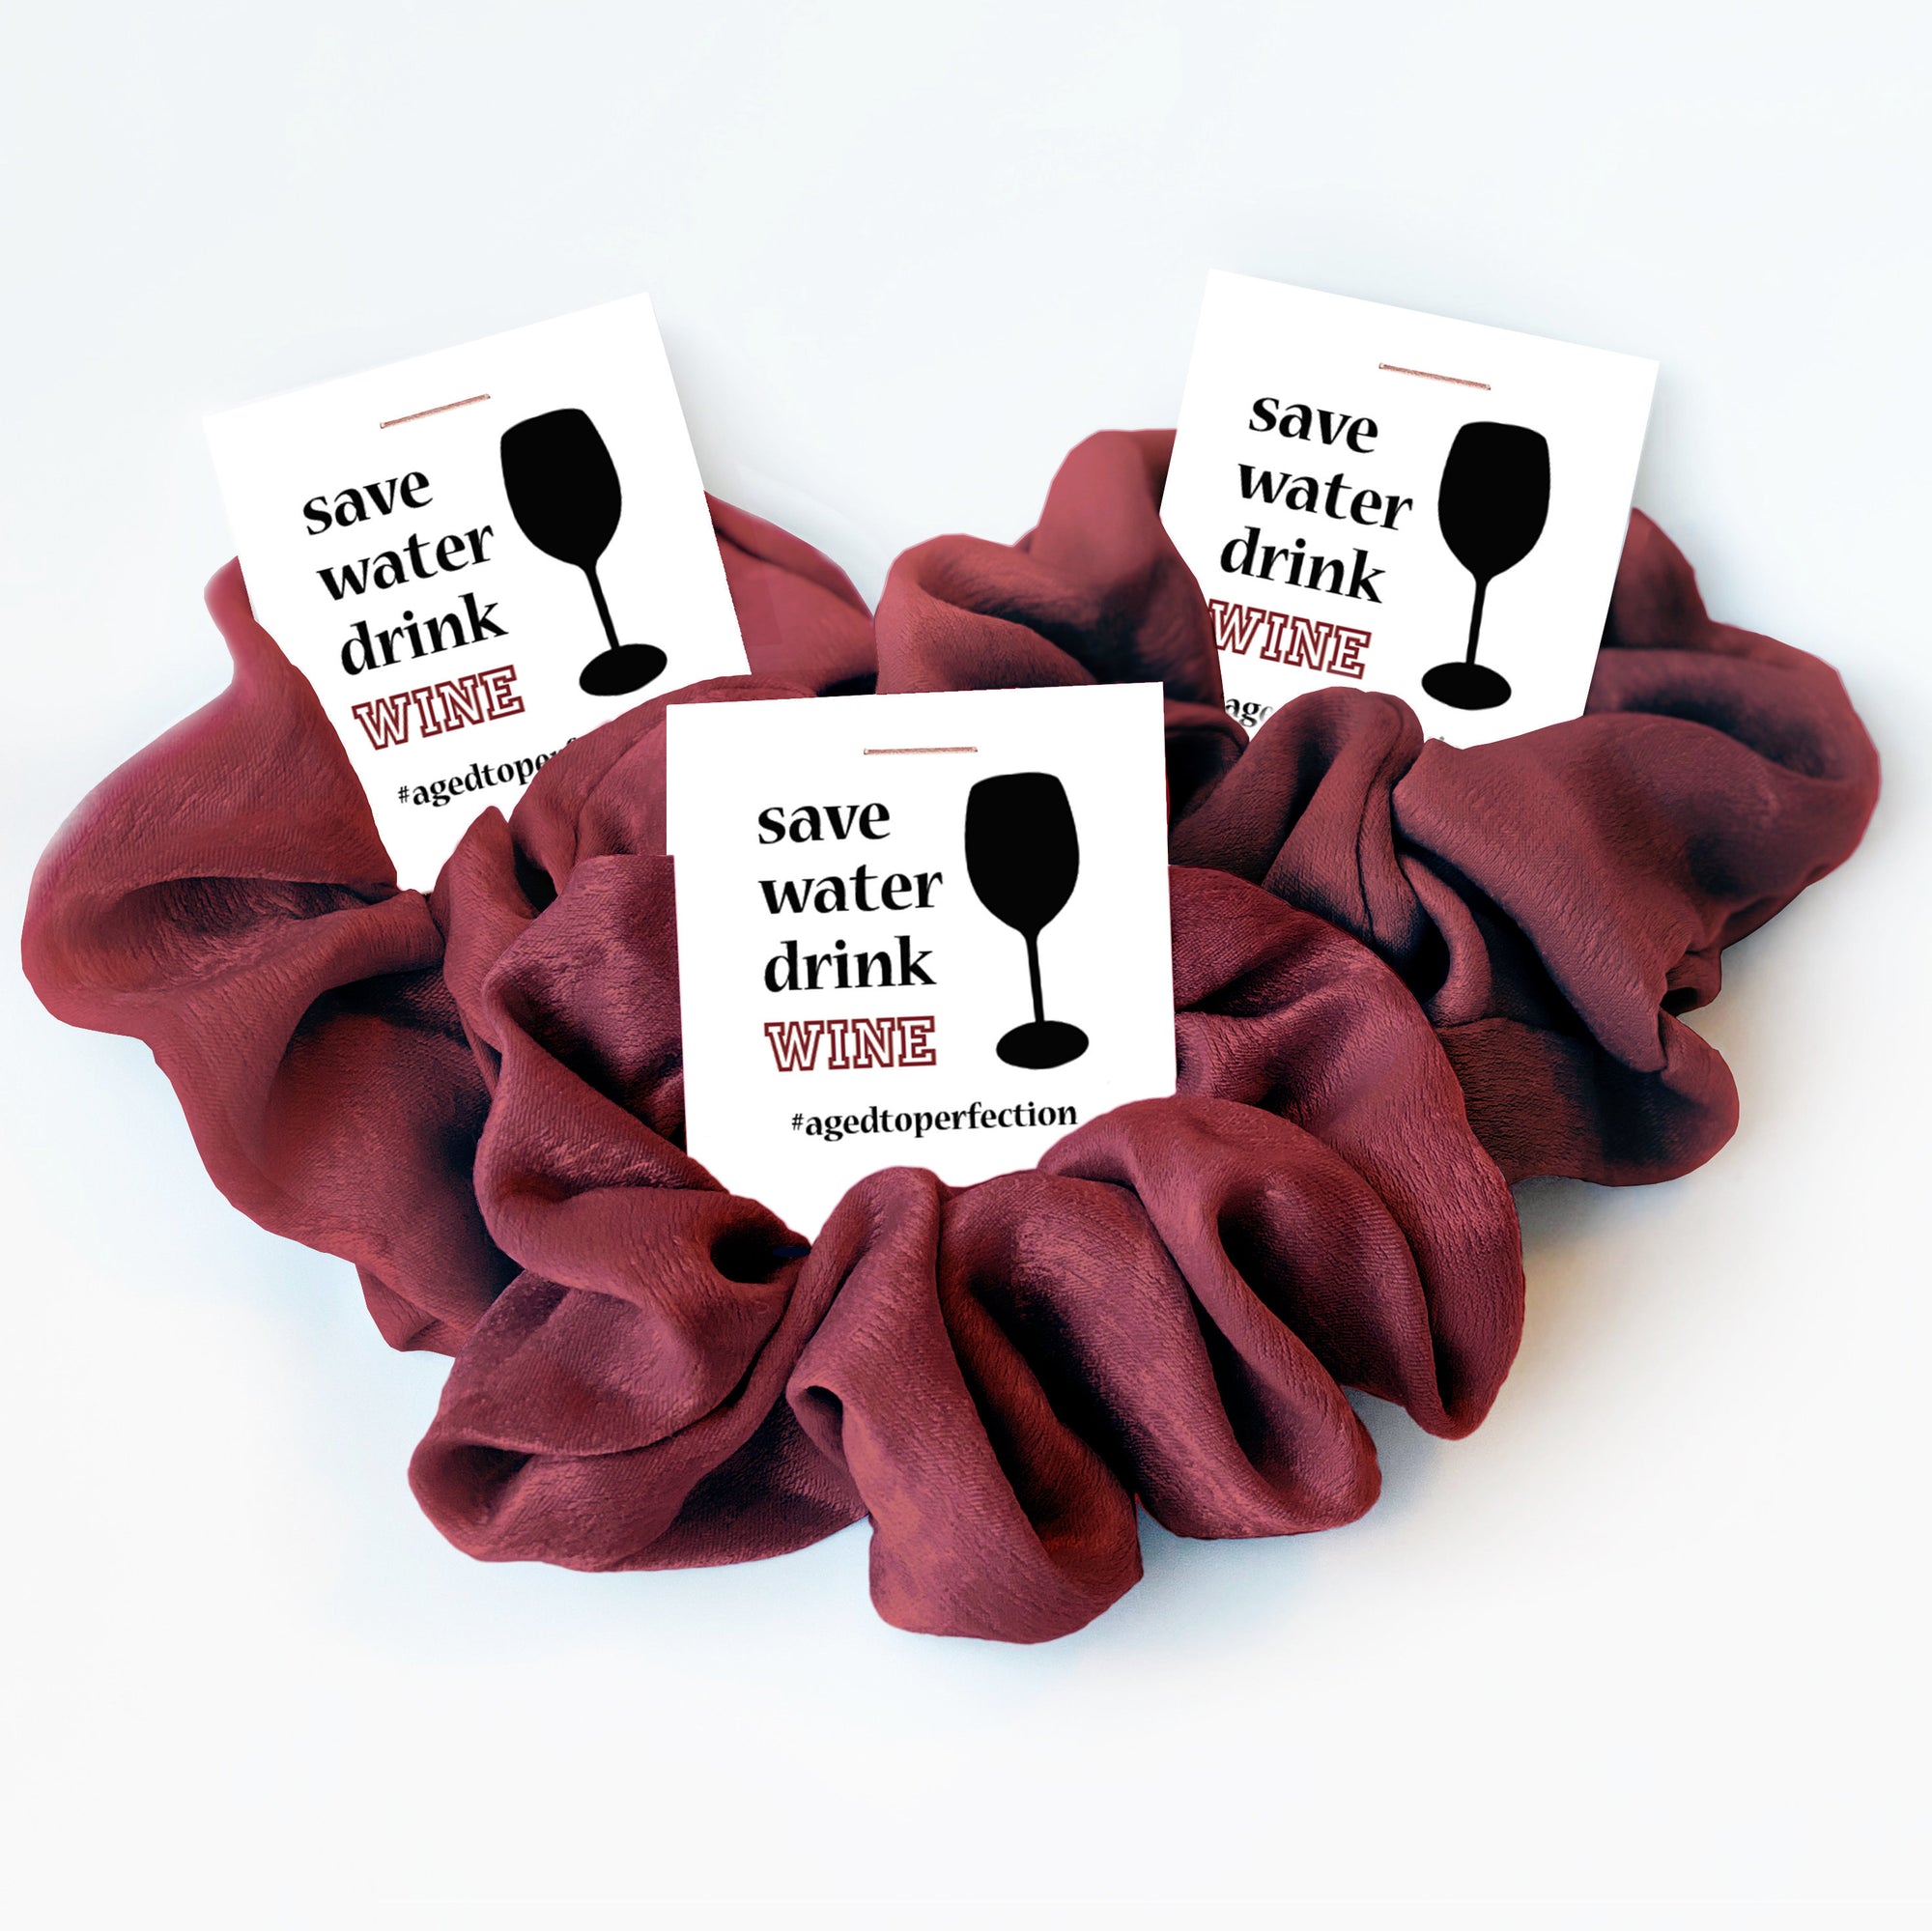 Wine Tasting Party Favors, Save Water Drink Wine, Scrunchie Hair Ties, Wine Tasting Gift, Wine Birthday Party Favors, Wine Tour Gifts